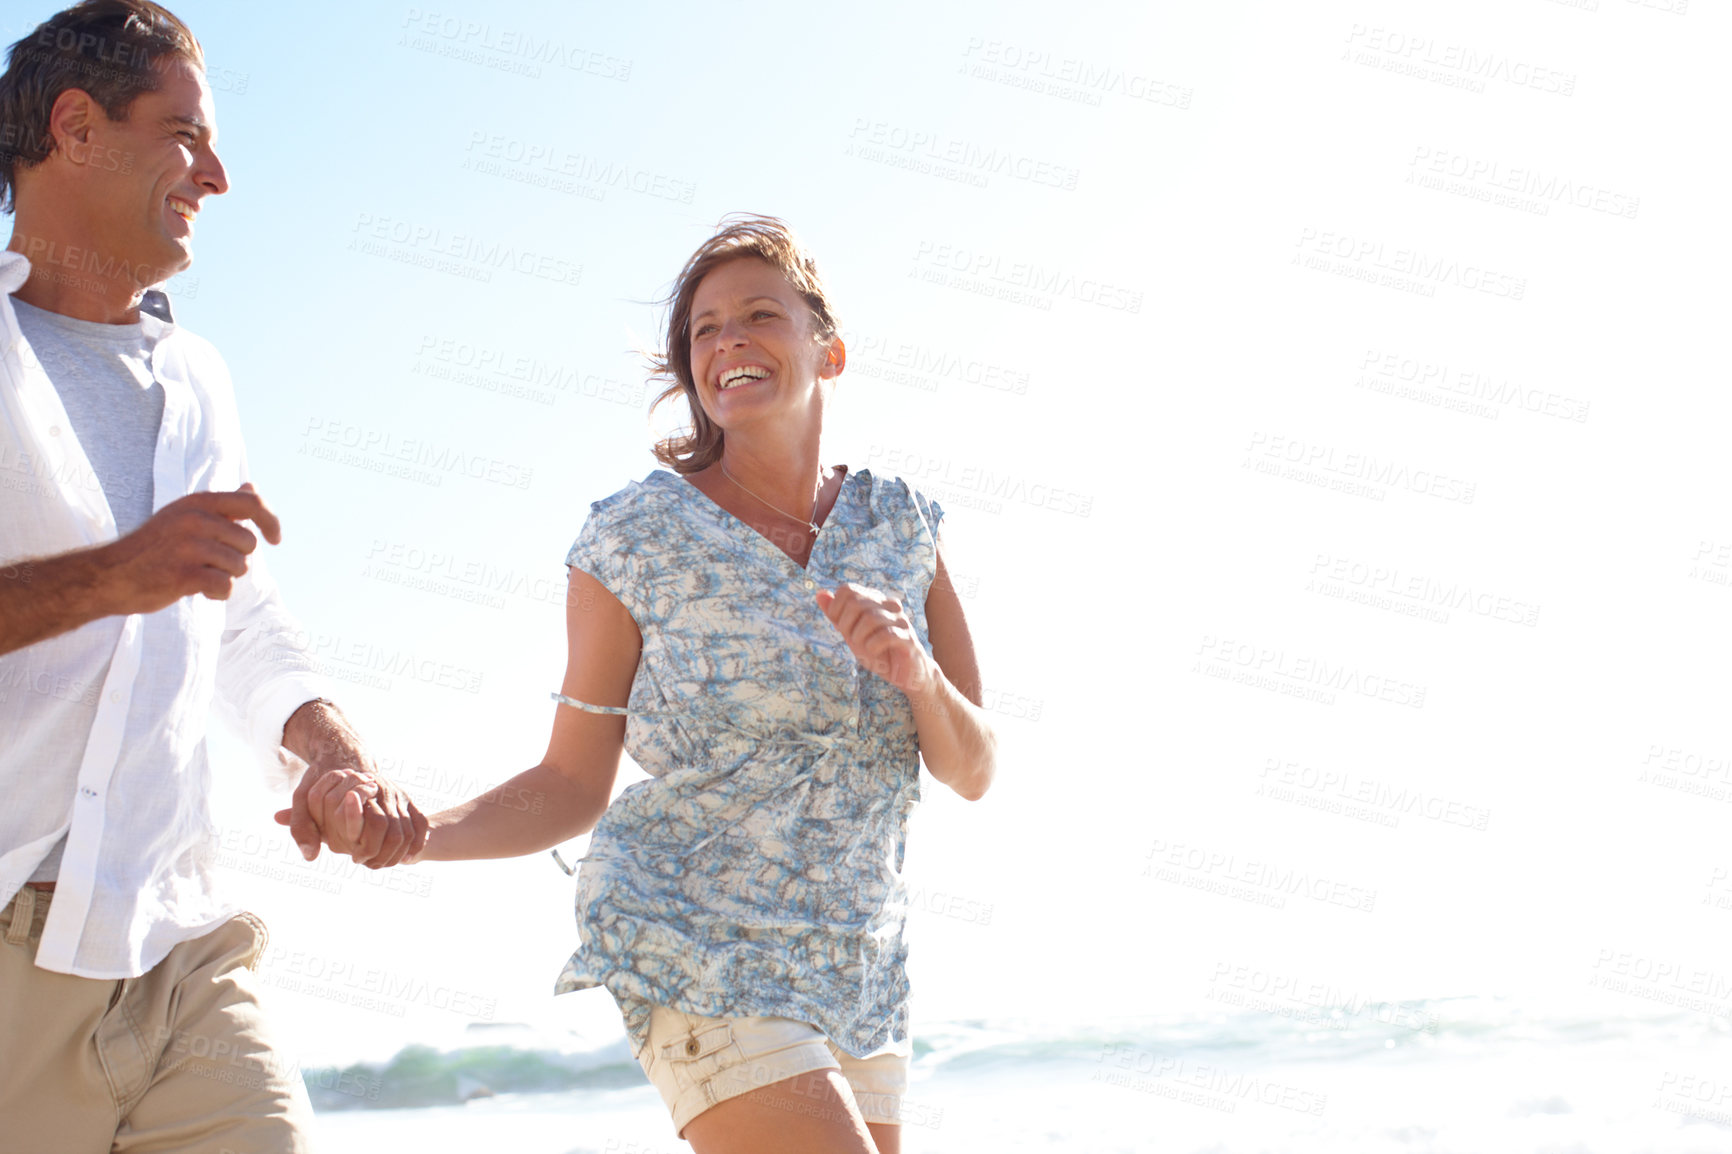 Buy stock photo A happy mature couple holding hands while running on the beach